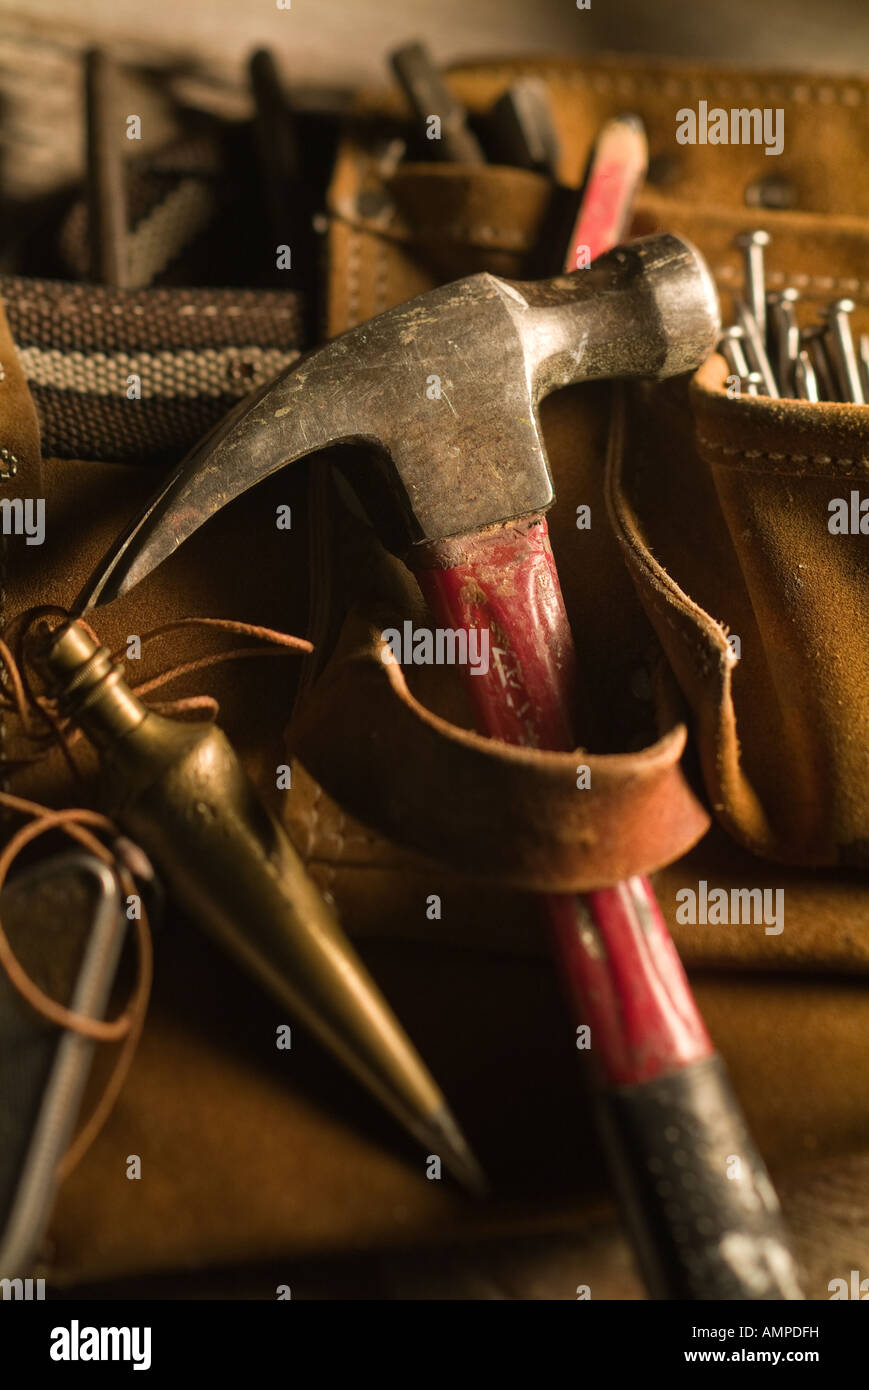 Bob Hammer High Resolution Stock Photography and Images - Alamy